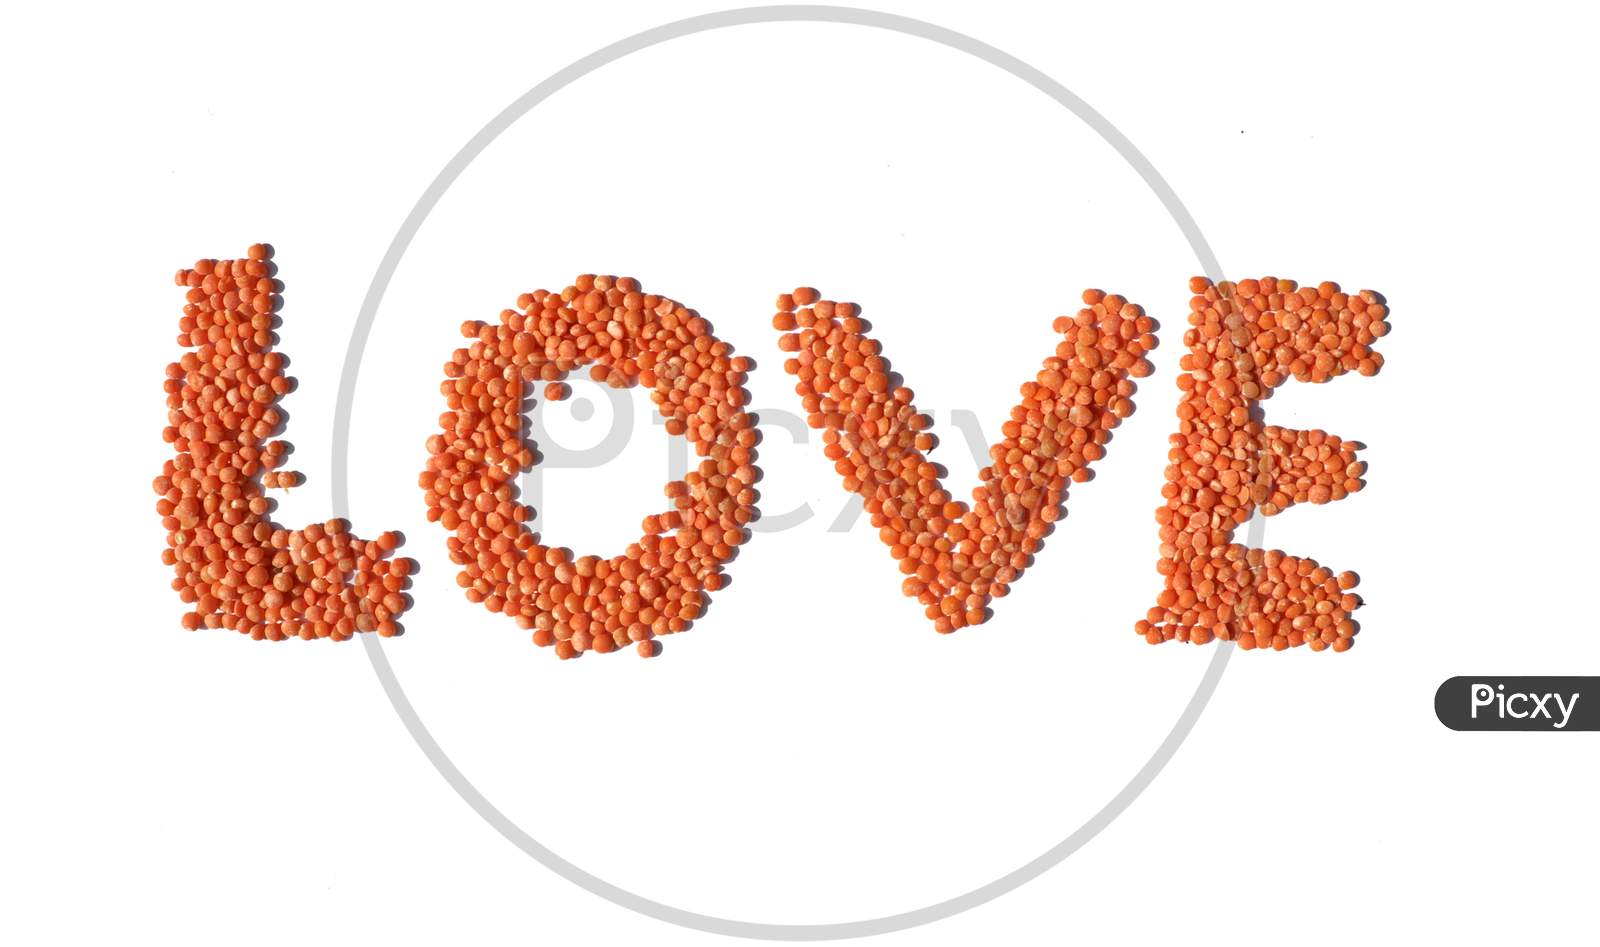 Love Word Written With Red Lentils On White Background With Copy Space, Perfect For Wallpaper